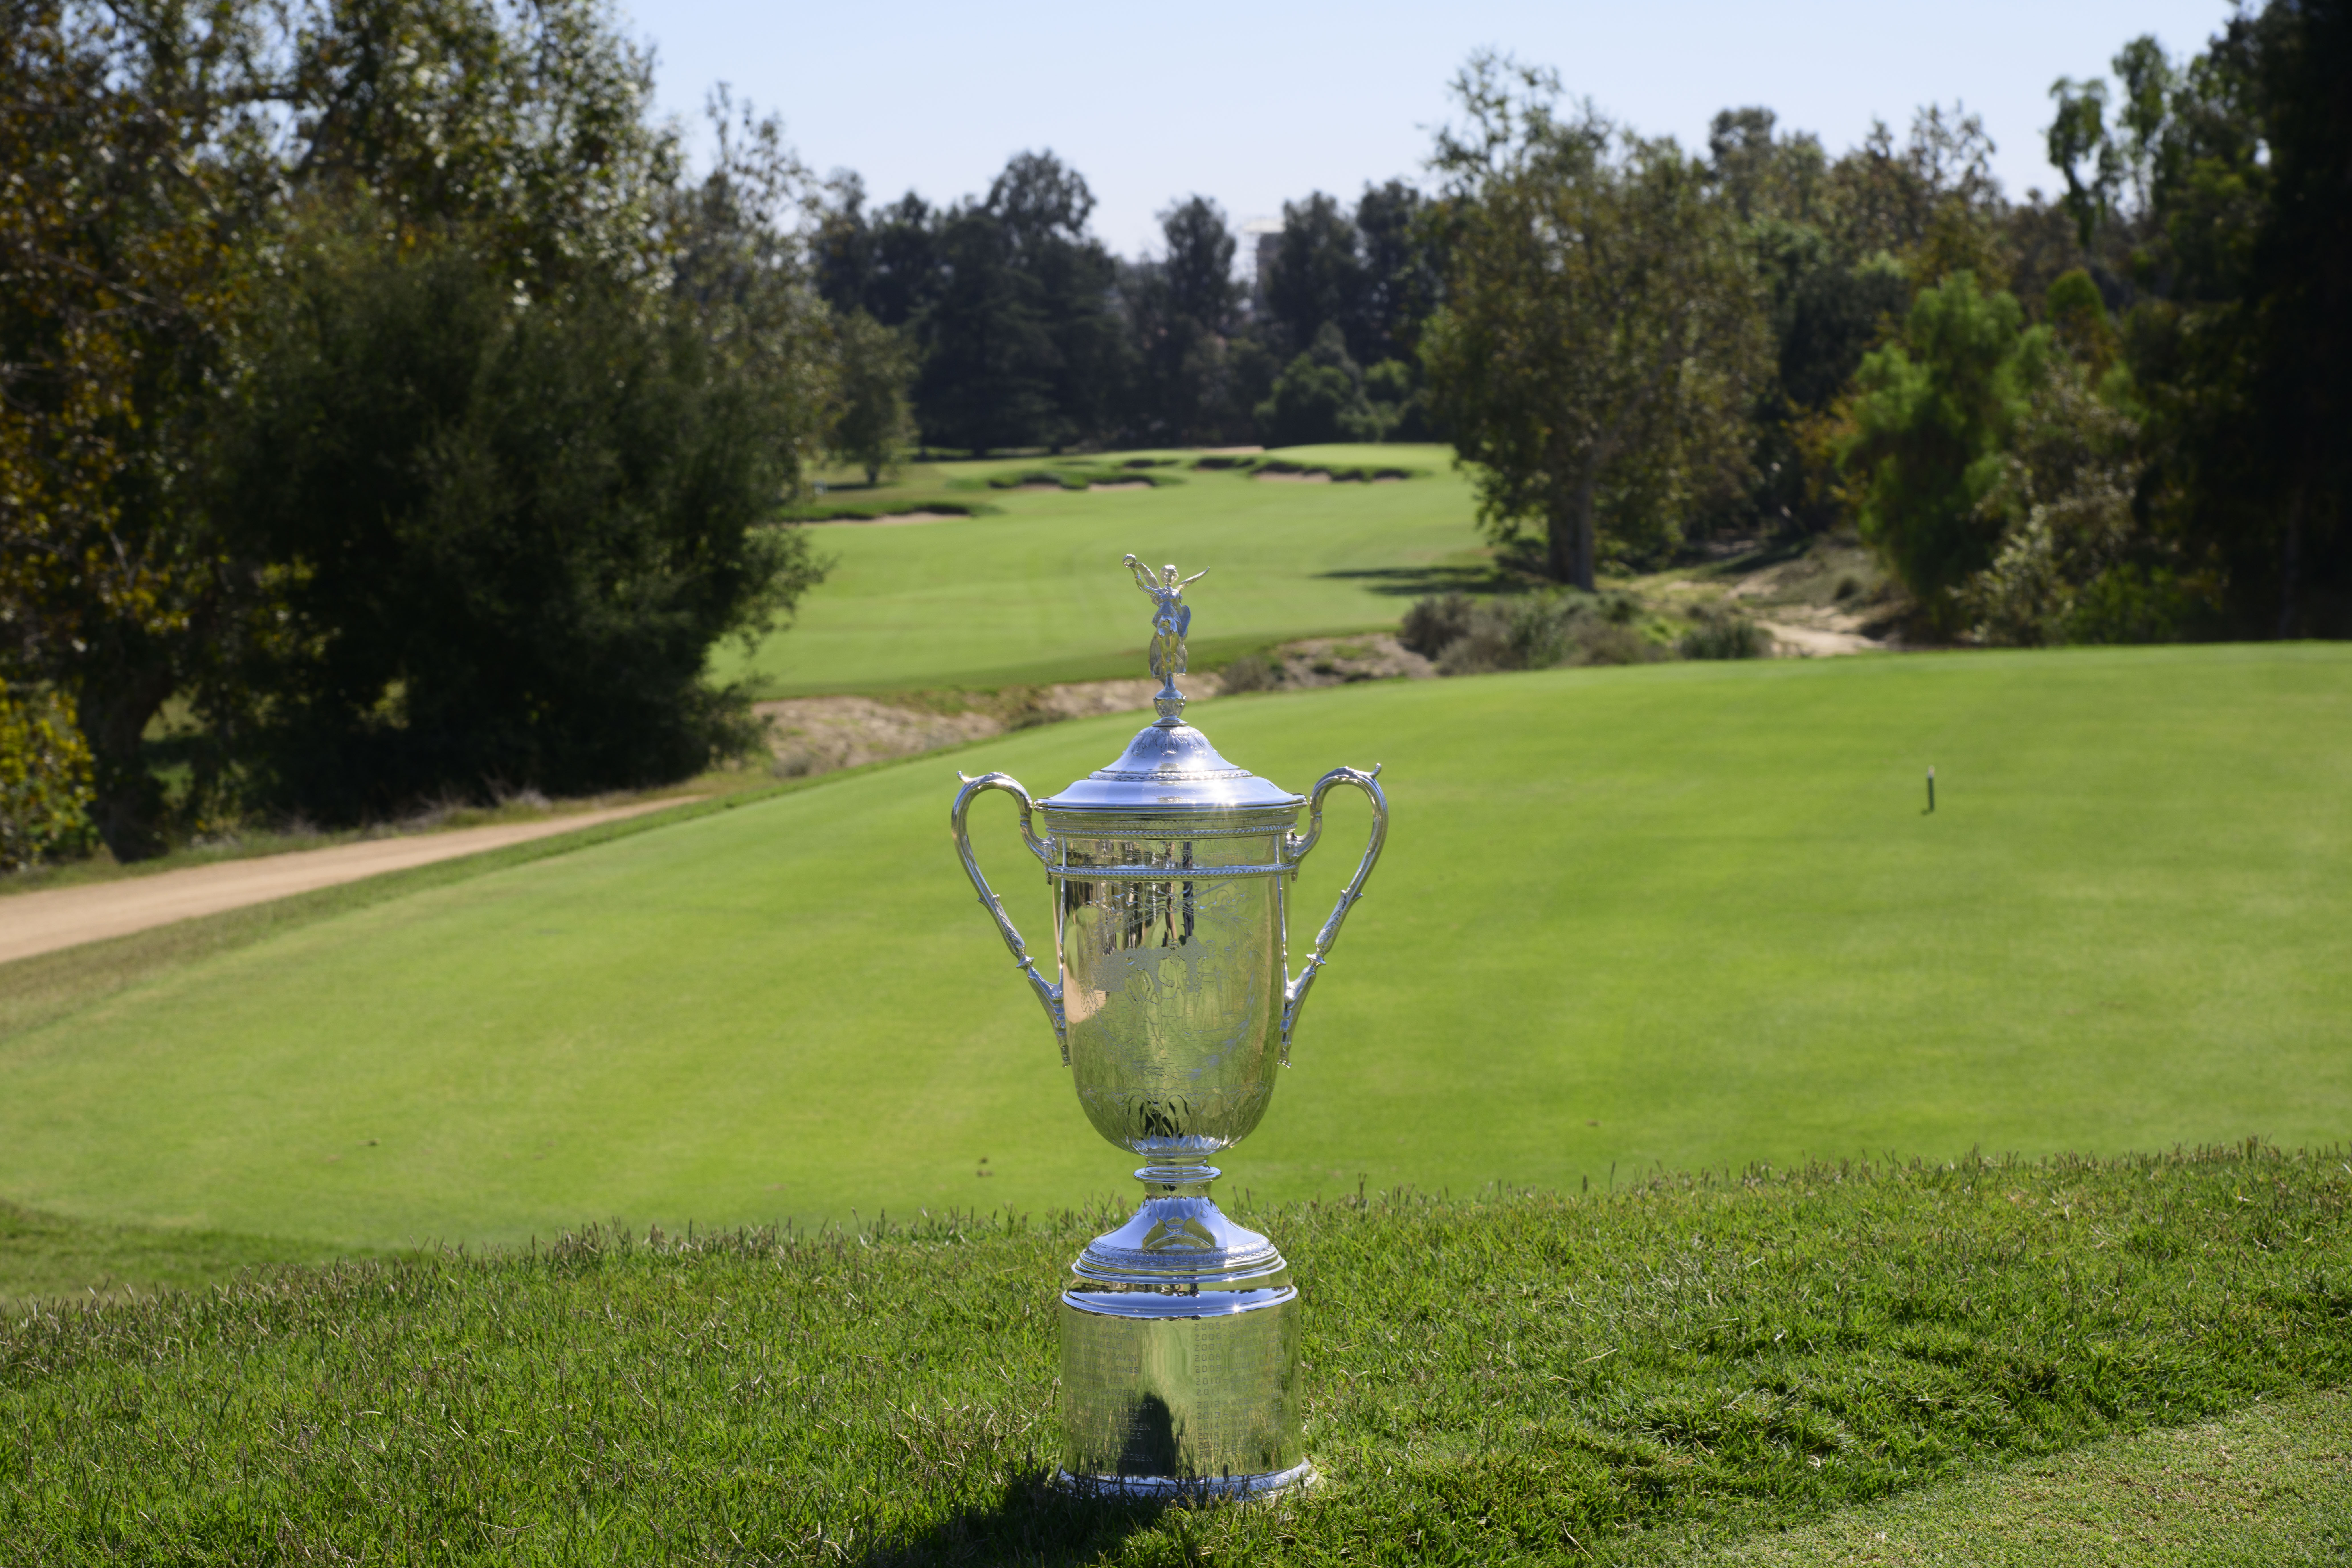 View of the championship trophy on the 17th tee box during the 123rd U.S. Open Championship - First Look event at Los Angeles Country Club North Course.